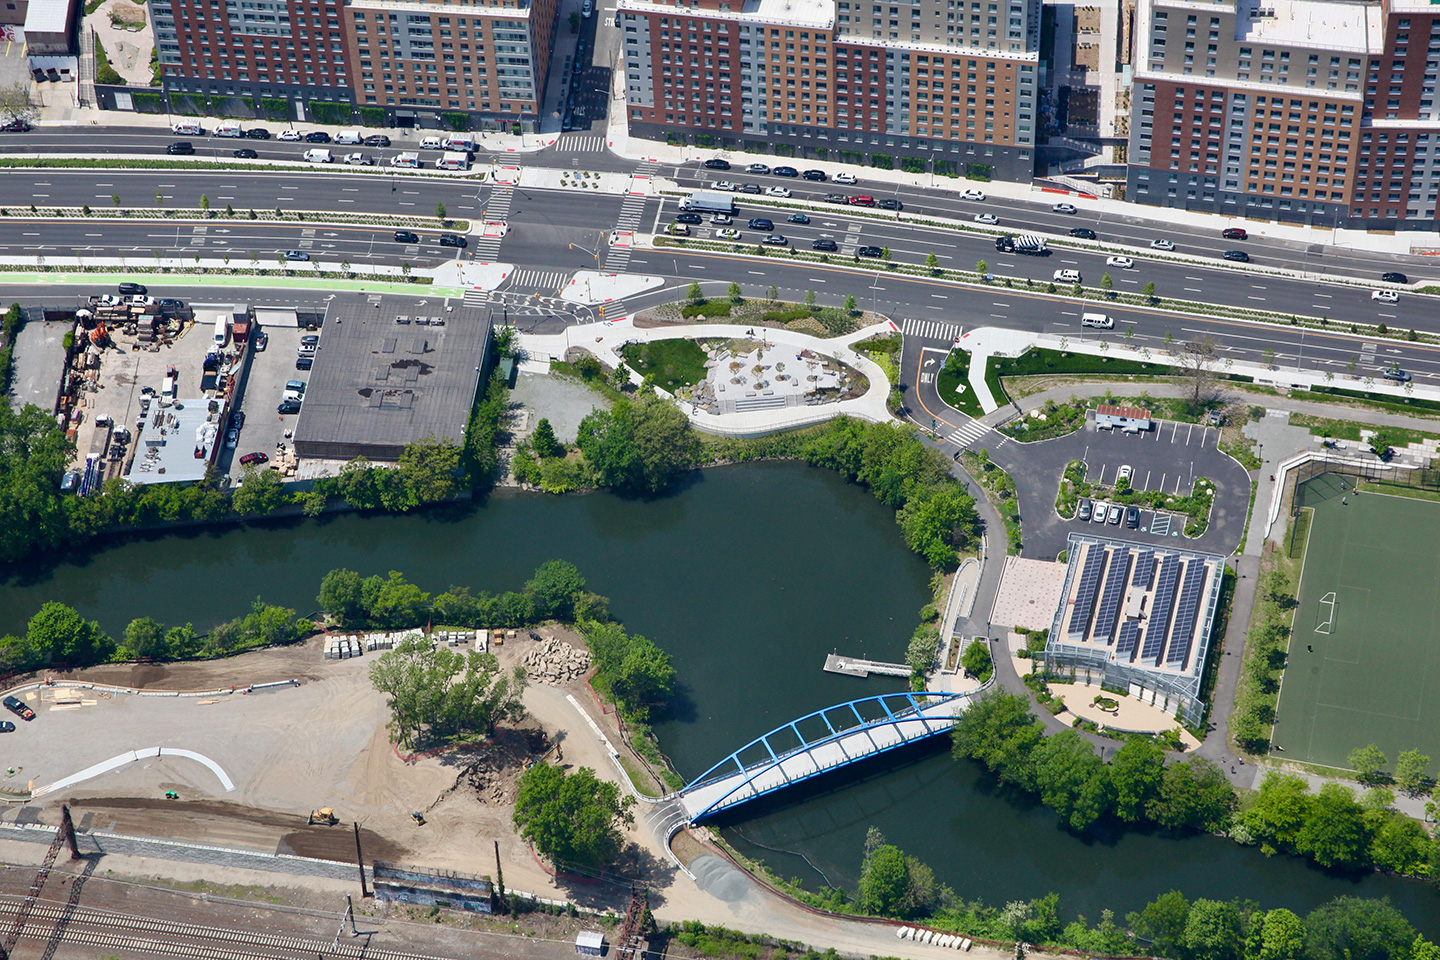 Aerial view of part of the Sheridan Boulevard (top), the overlook plaza (center), and the pedestrian bridge (bottom).